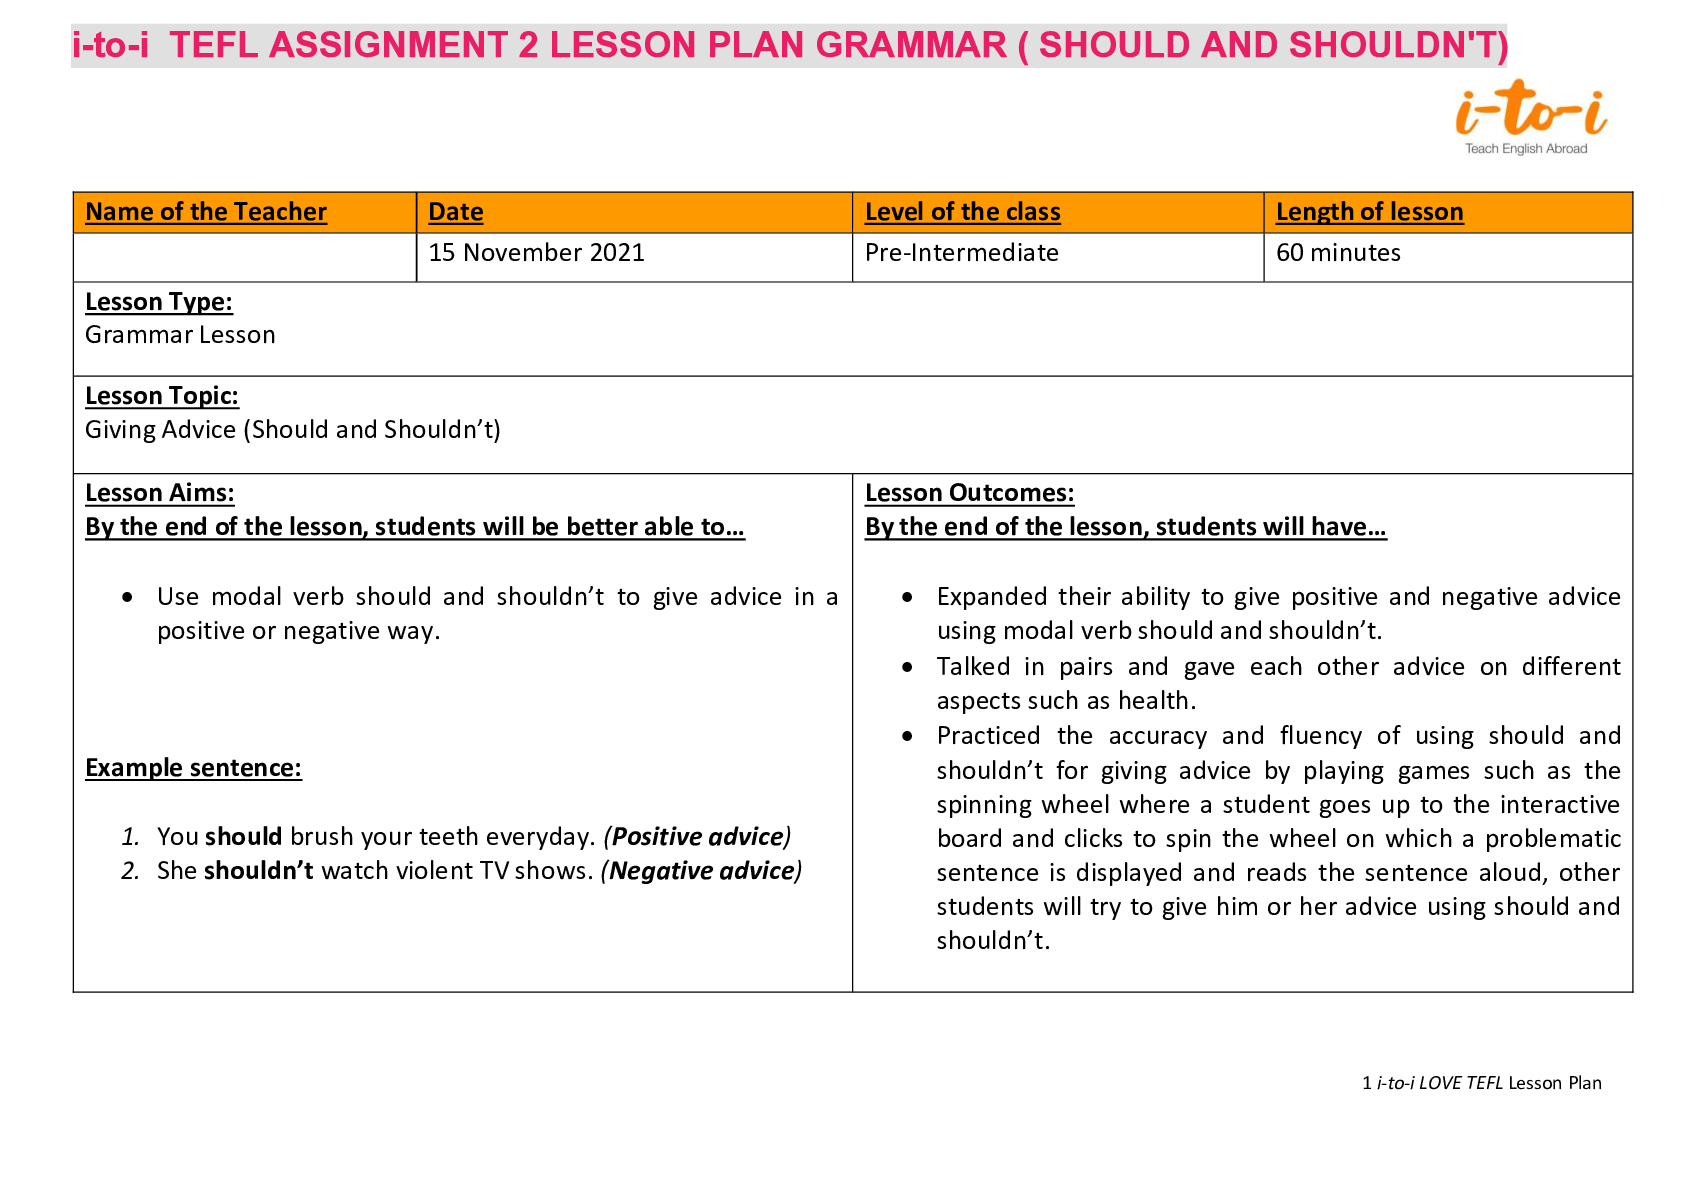 tefl assignment 3 reading lesson plan